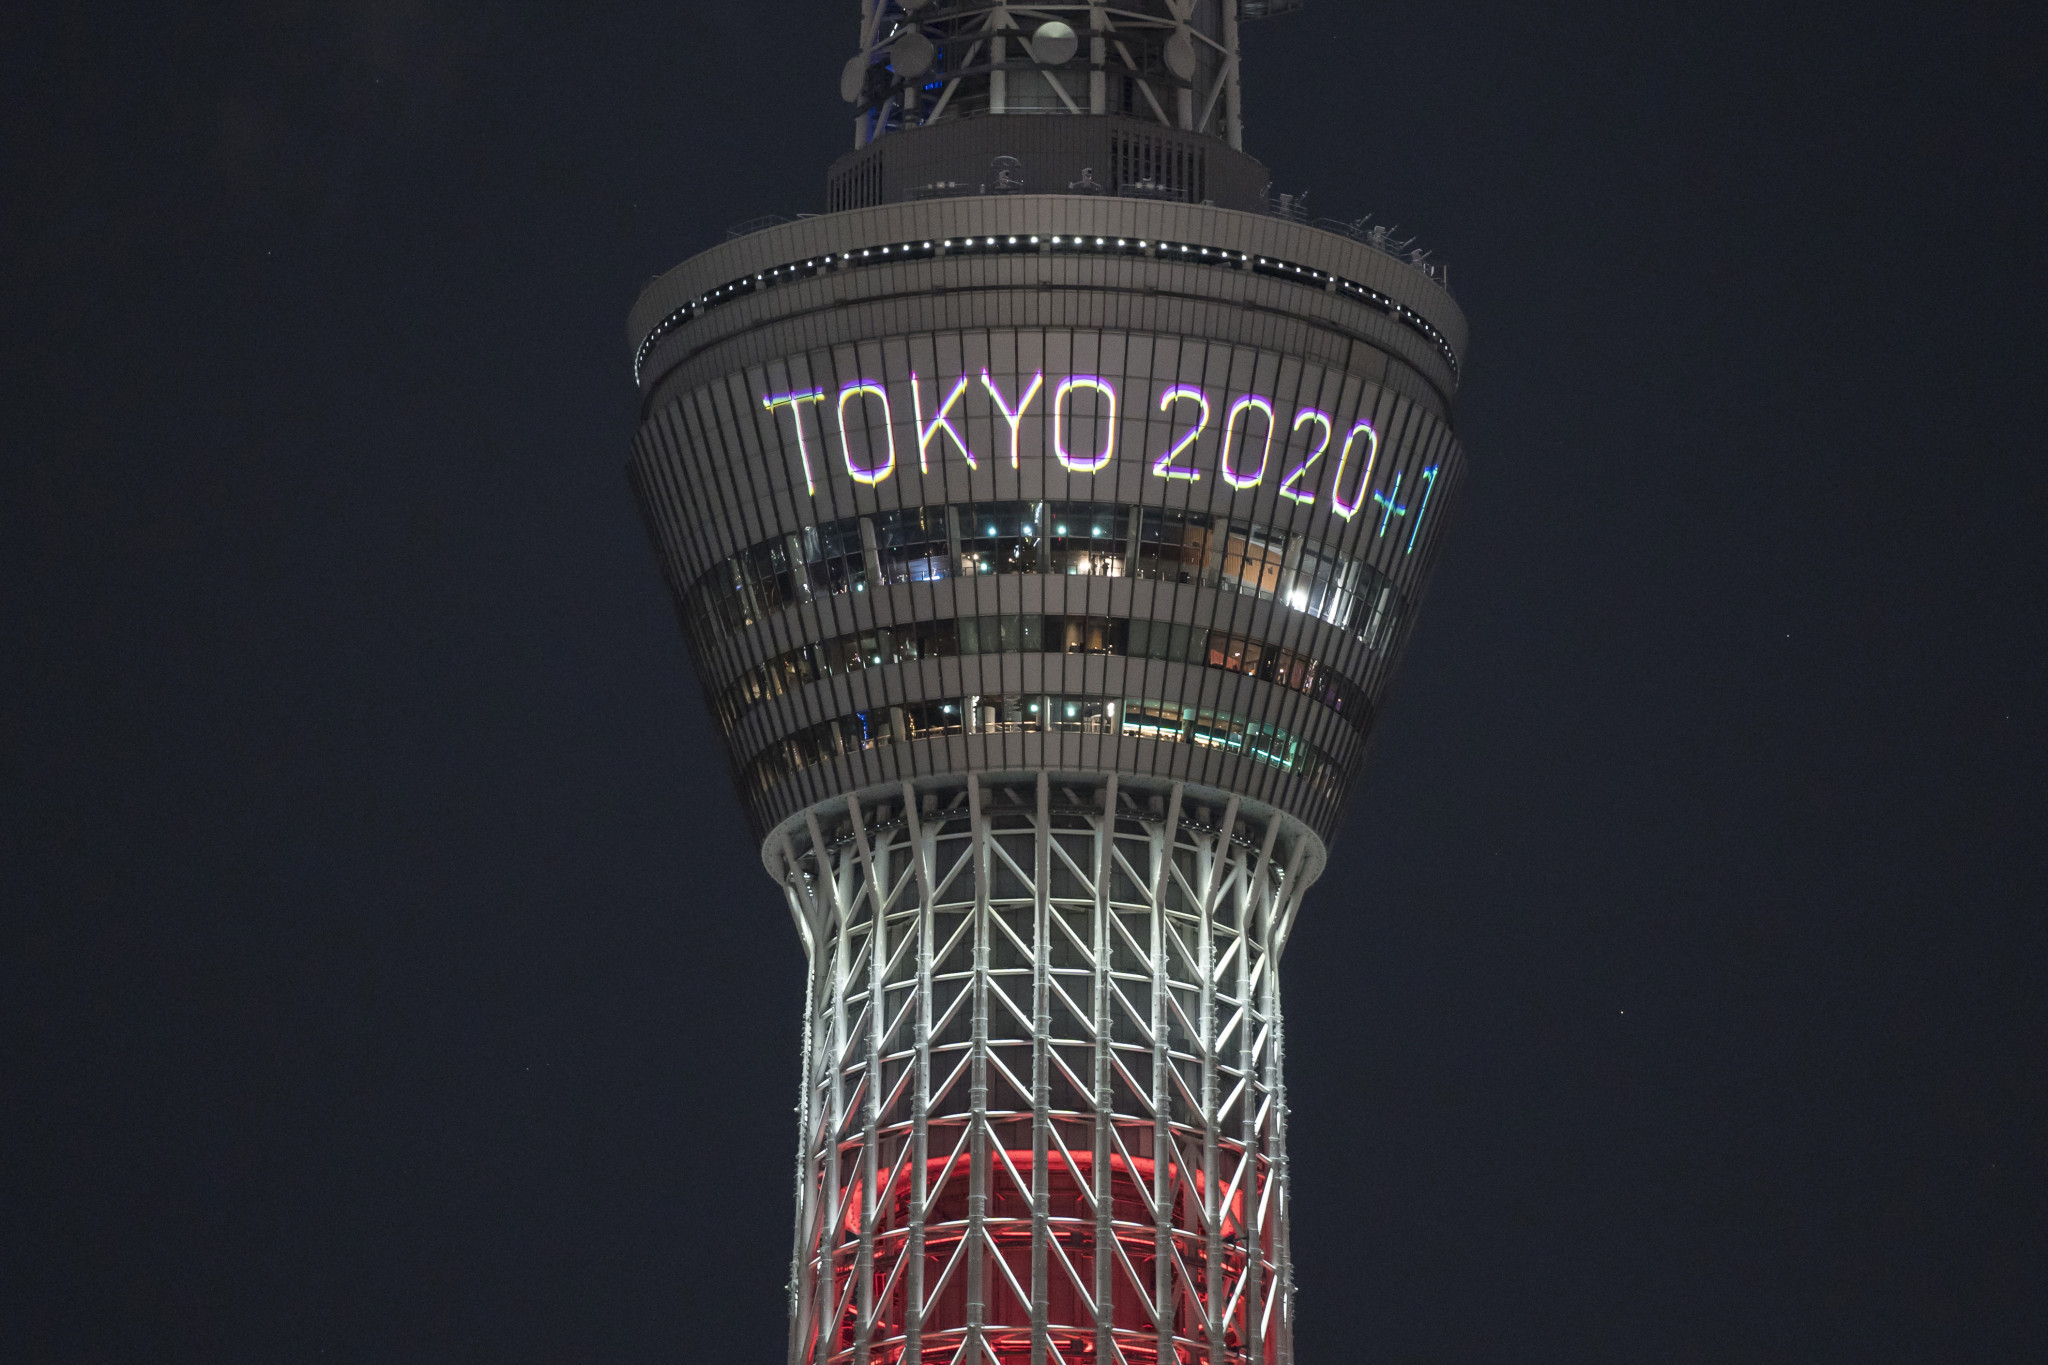 A panel set-up to aid the organisation of next year's Olympic and Paralympic Games in Tokyo during the coronavirus pandemic is scheduled to meet for the first time on Friday ©Getty Images